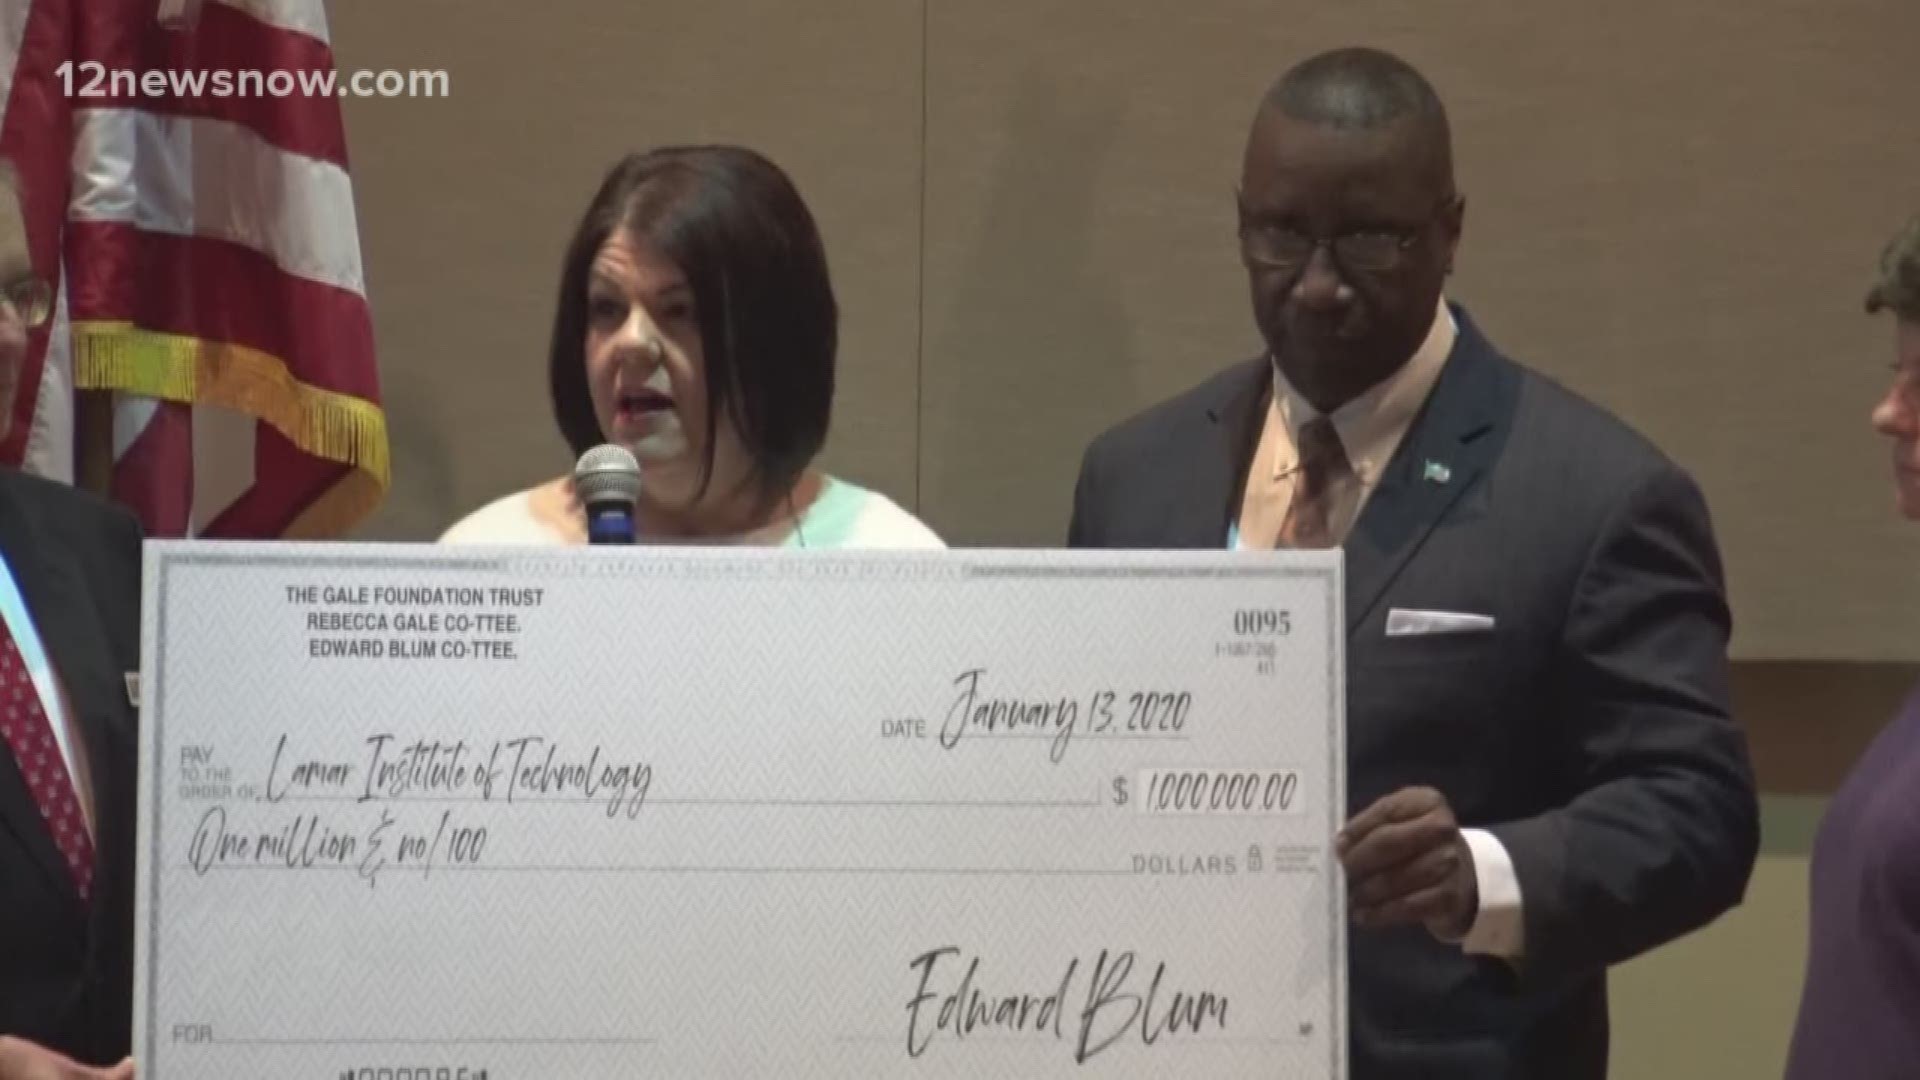 The Lamar Institute of Technology received a $1M donation on Monday from the Gale Foundation.